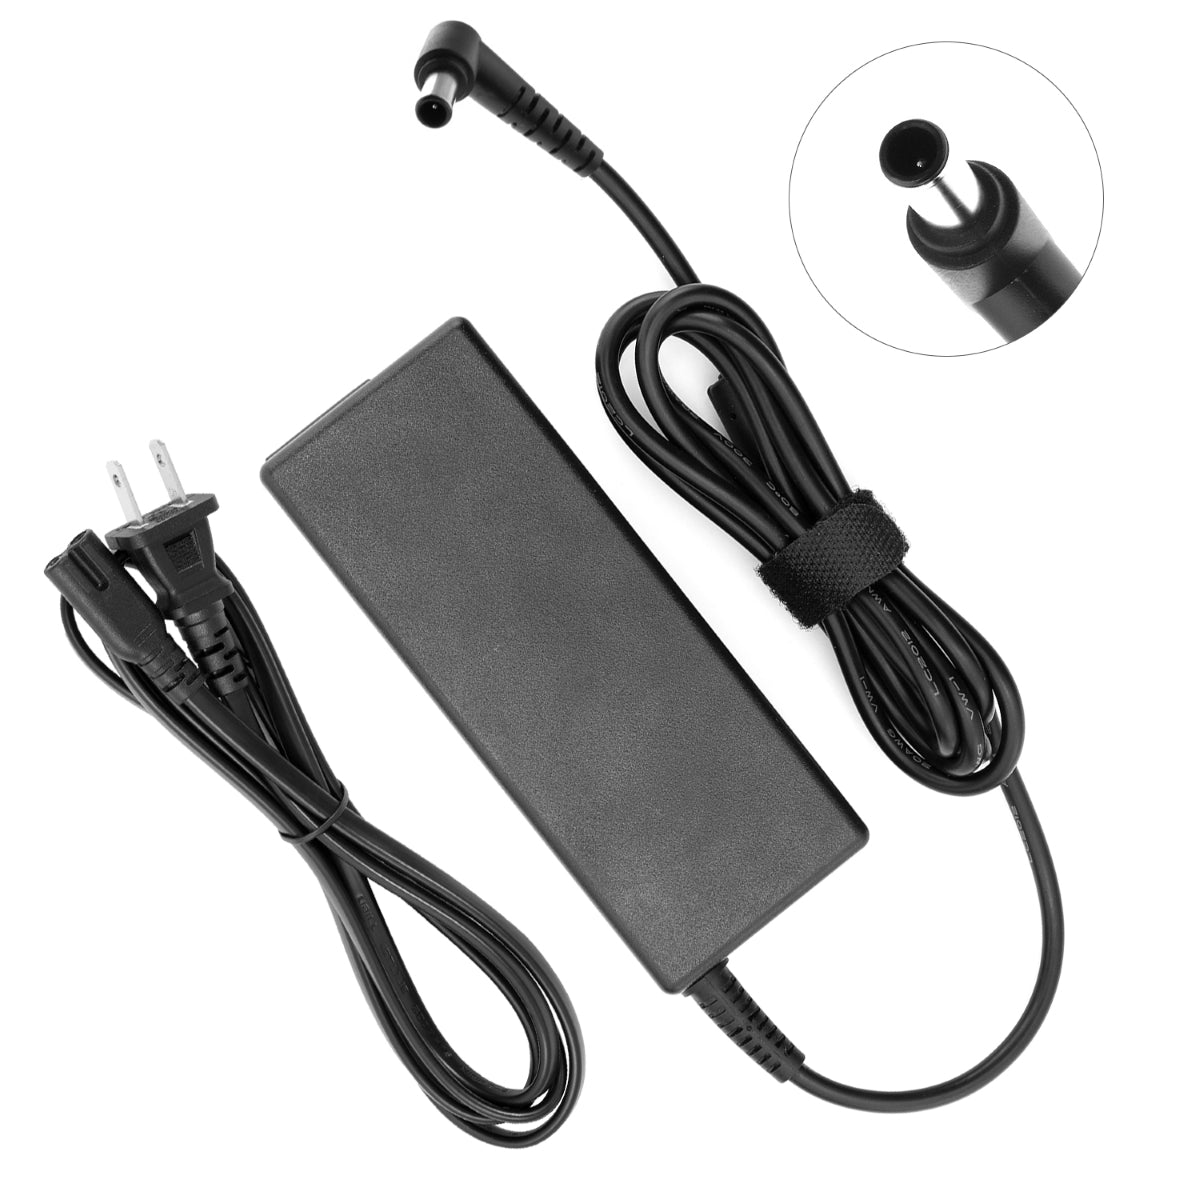 Power Adapter for LG 27UD88-W Monitor TV